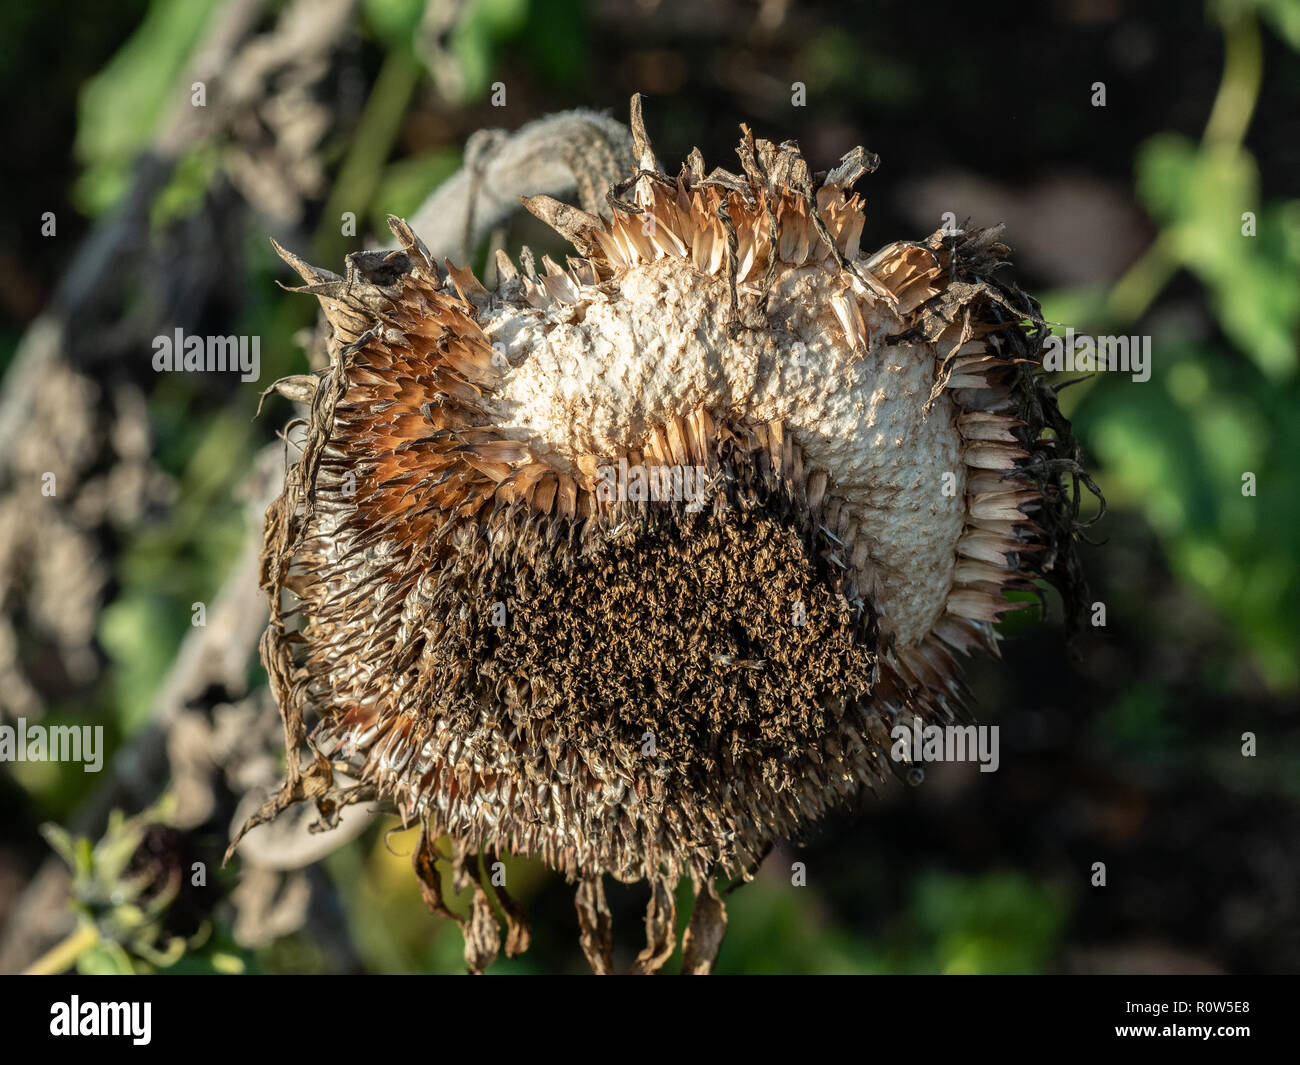 A close up of a sunflower seed head that has been partially eaten by birds Stock Photo